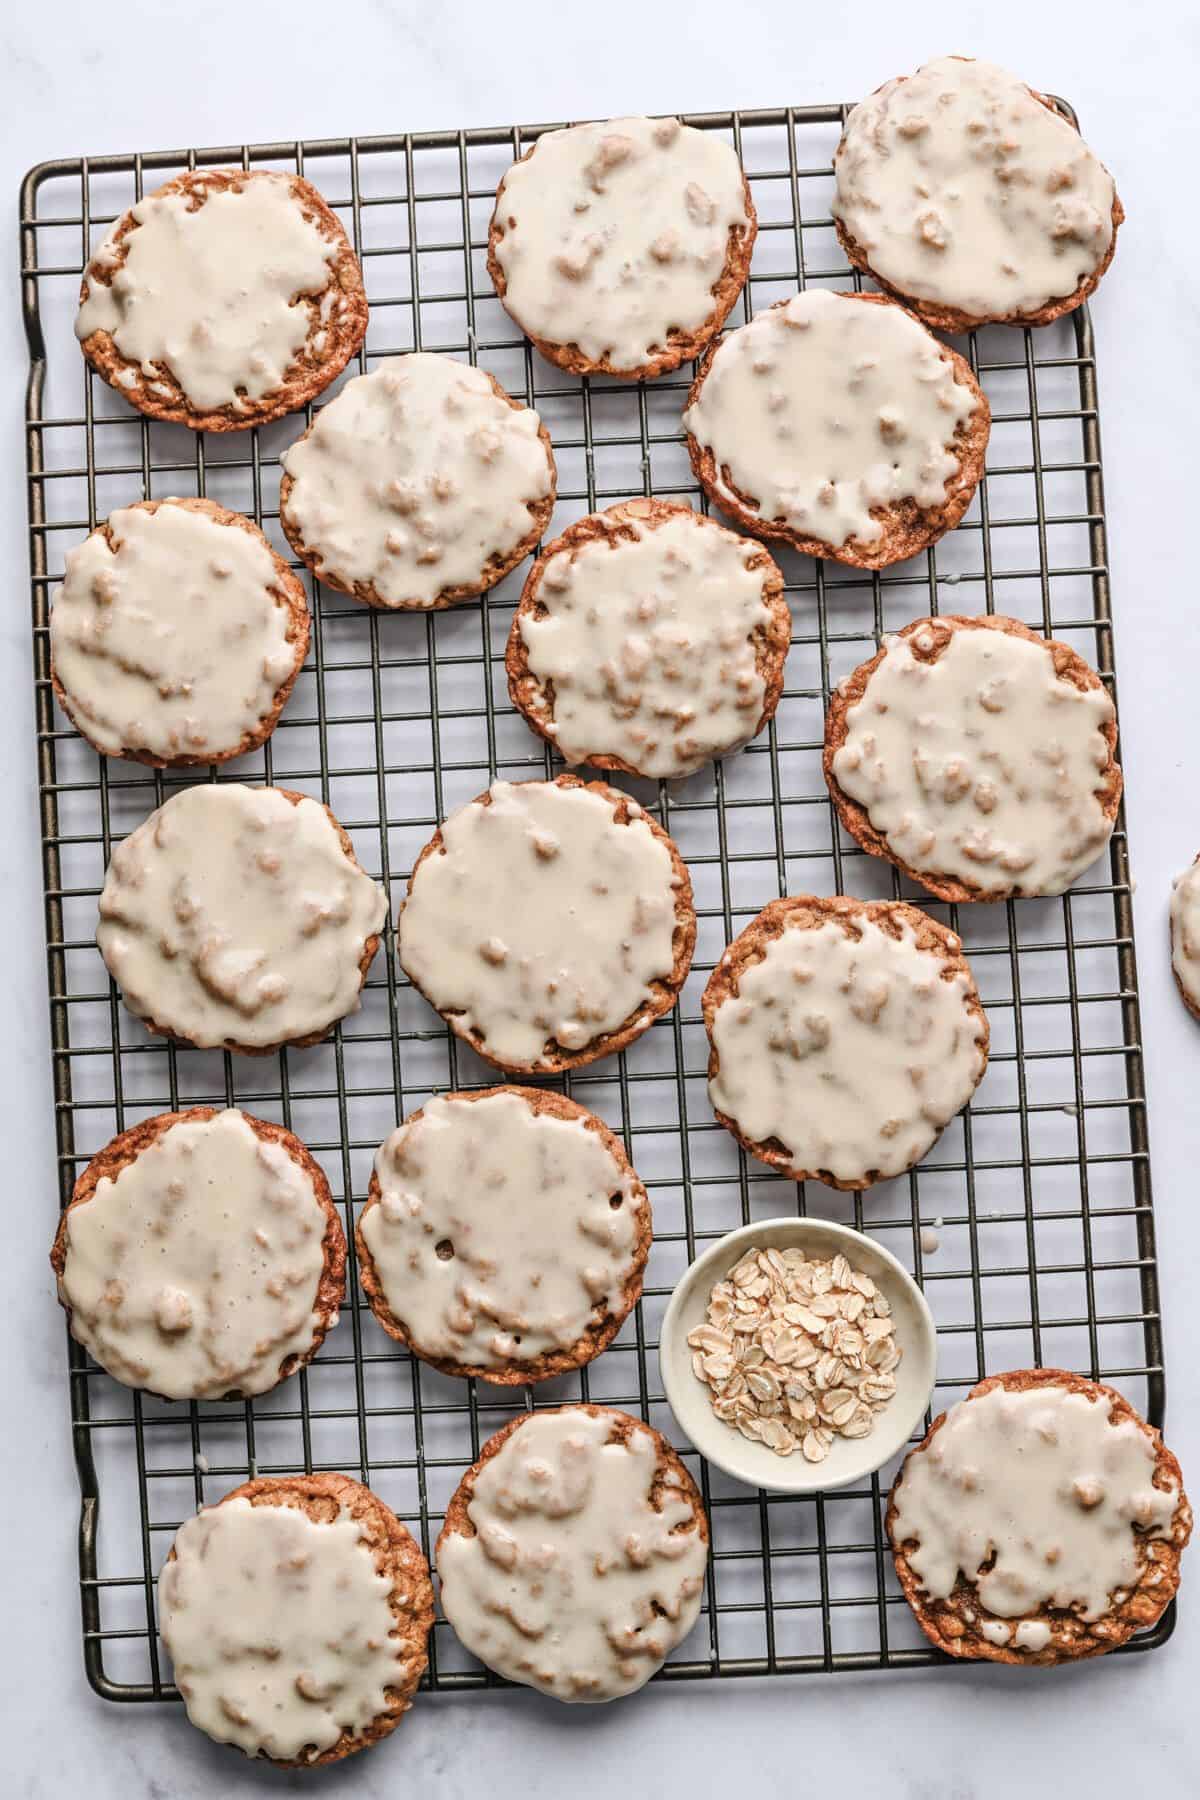 Iced oatmeal cookies on a wire rack with a small dish of oats.